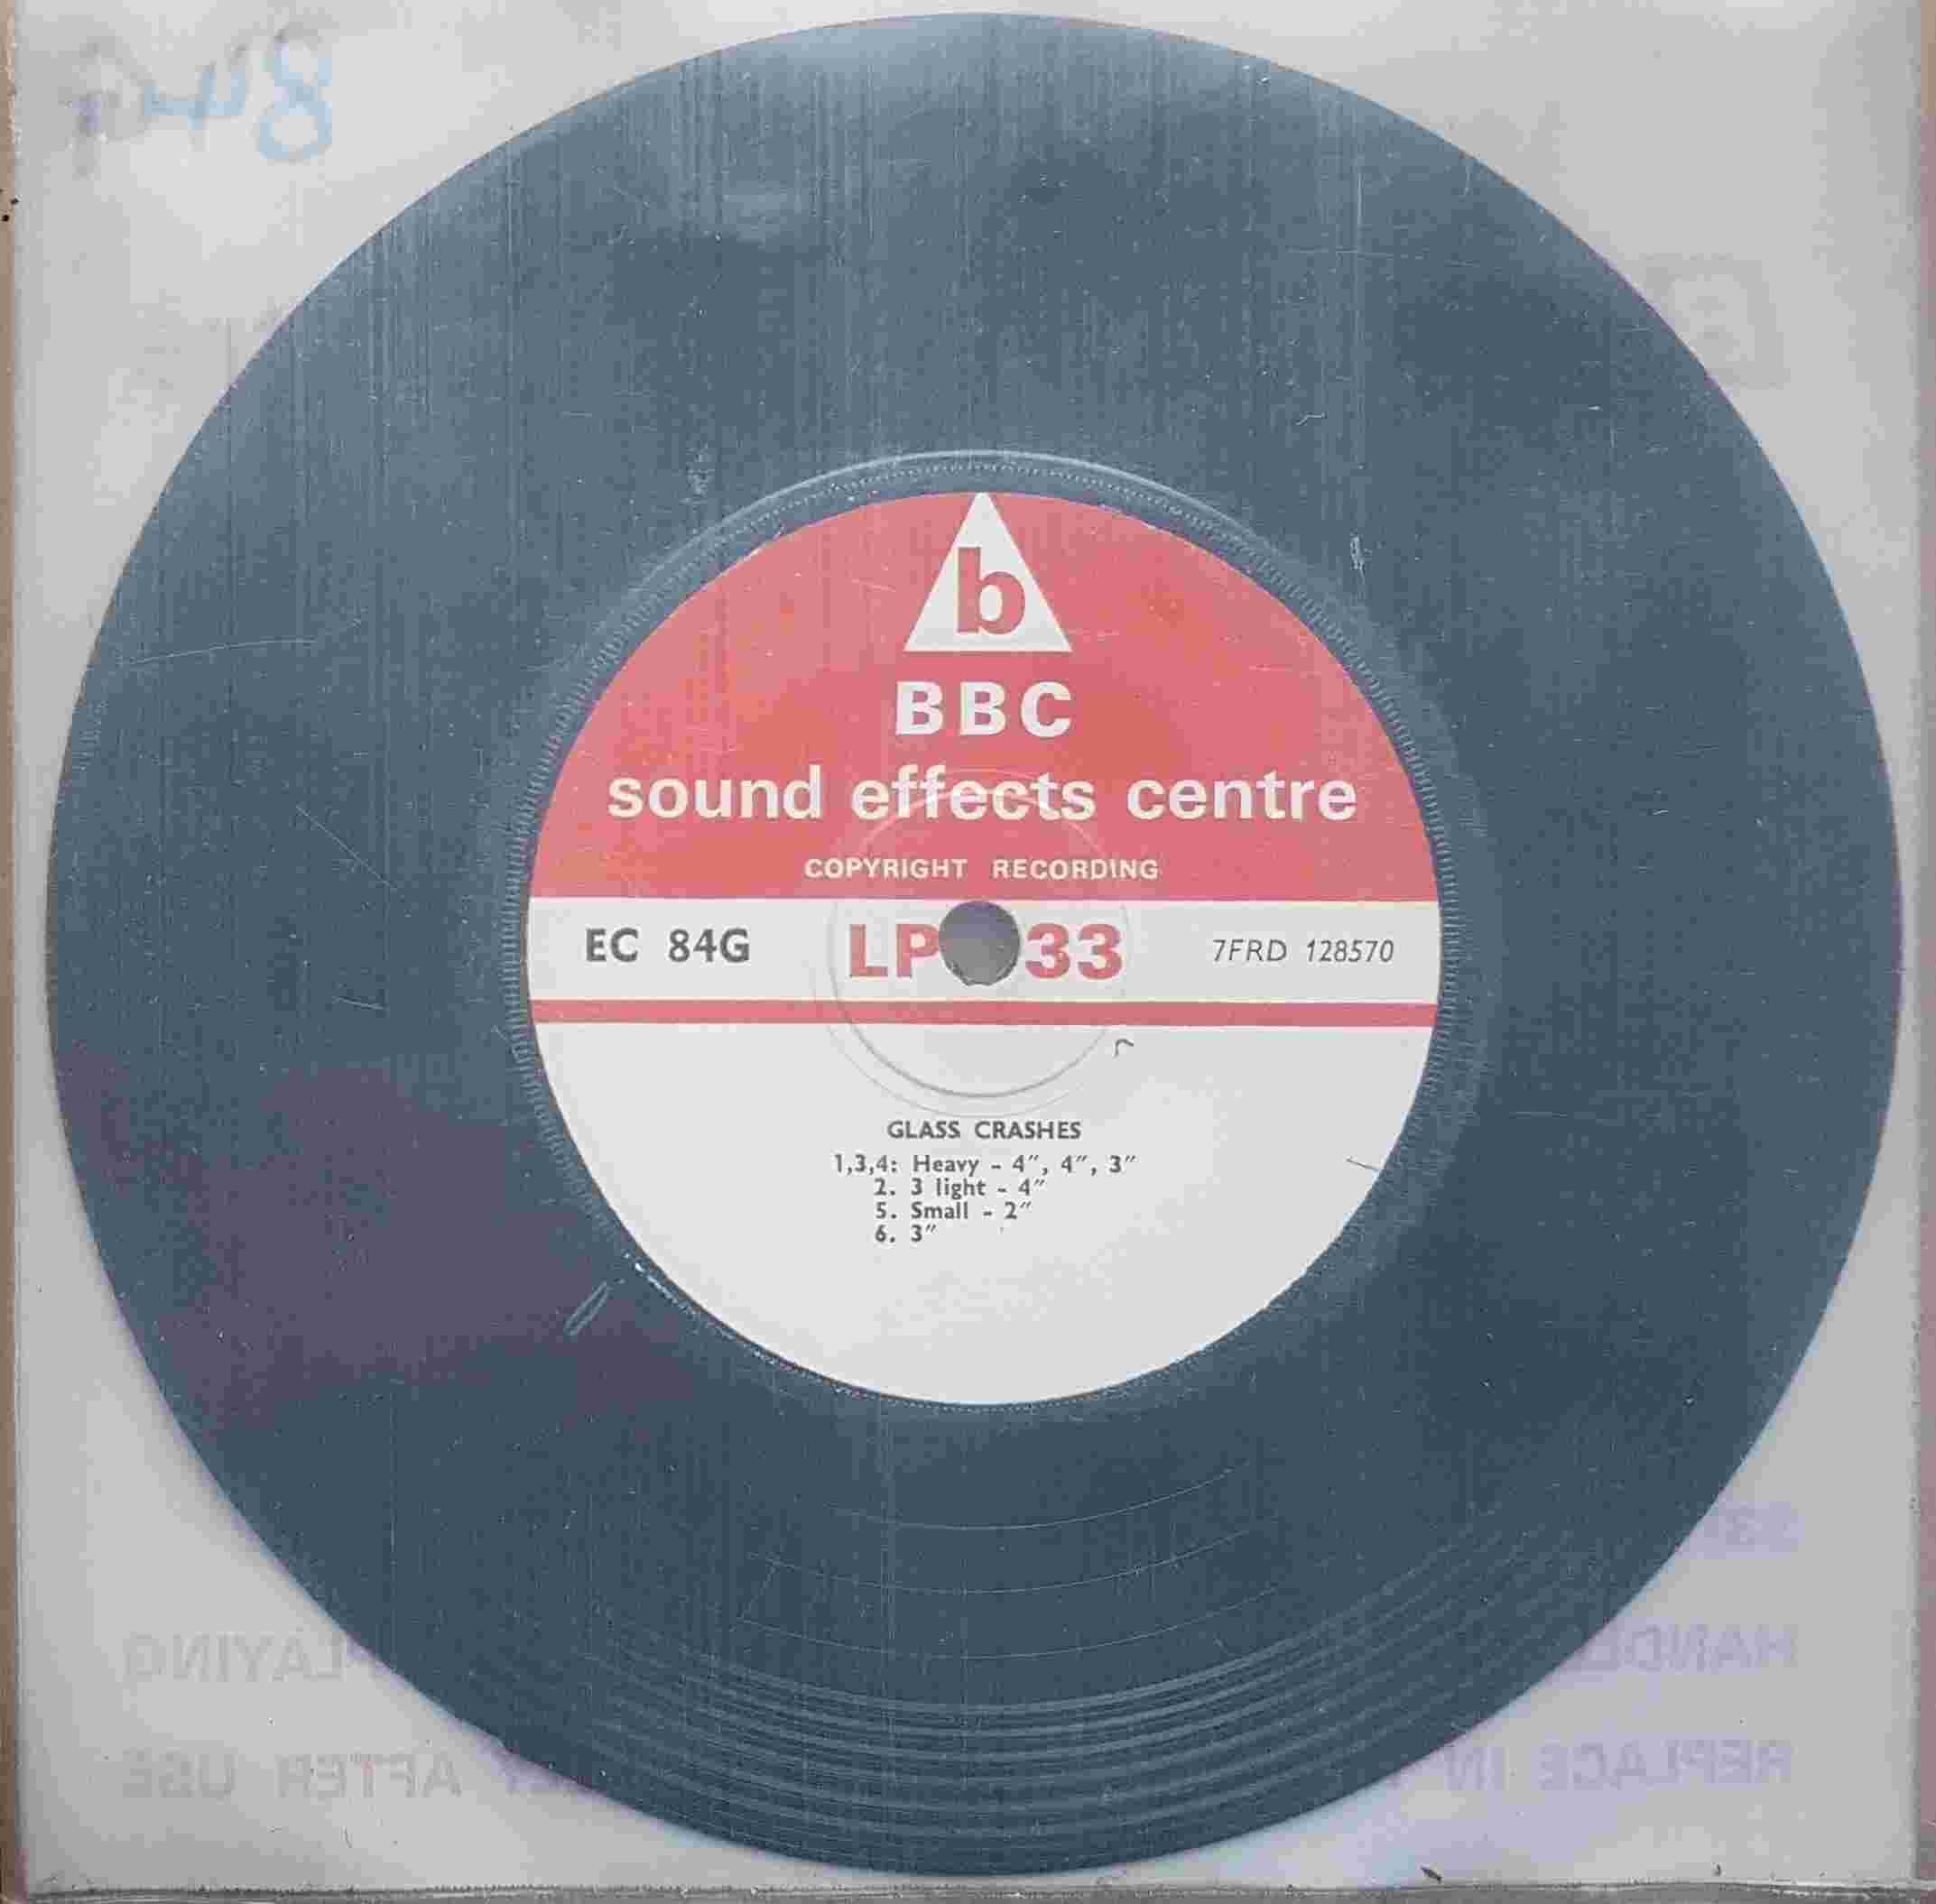 Picture of EC 84G Glass crashes by artist Not registered from the BBC records and Tapes library